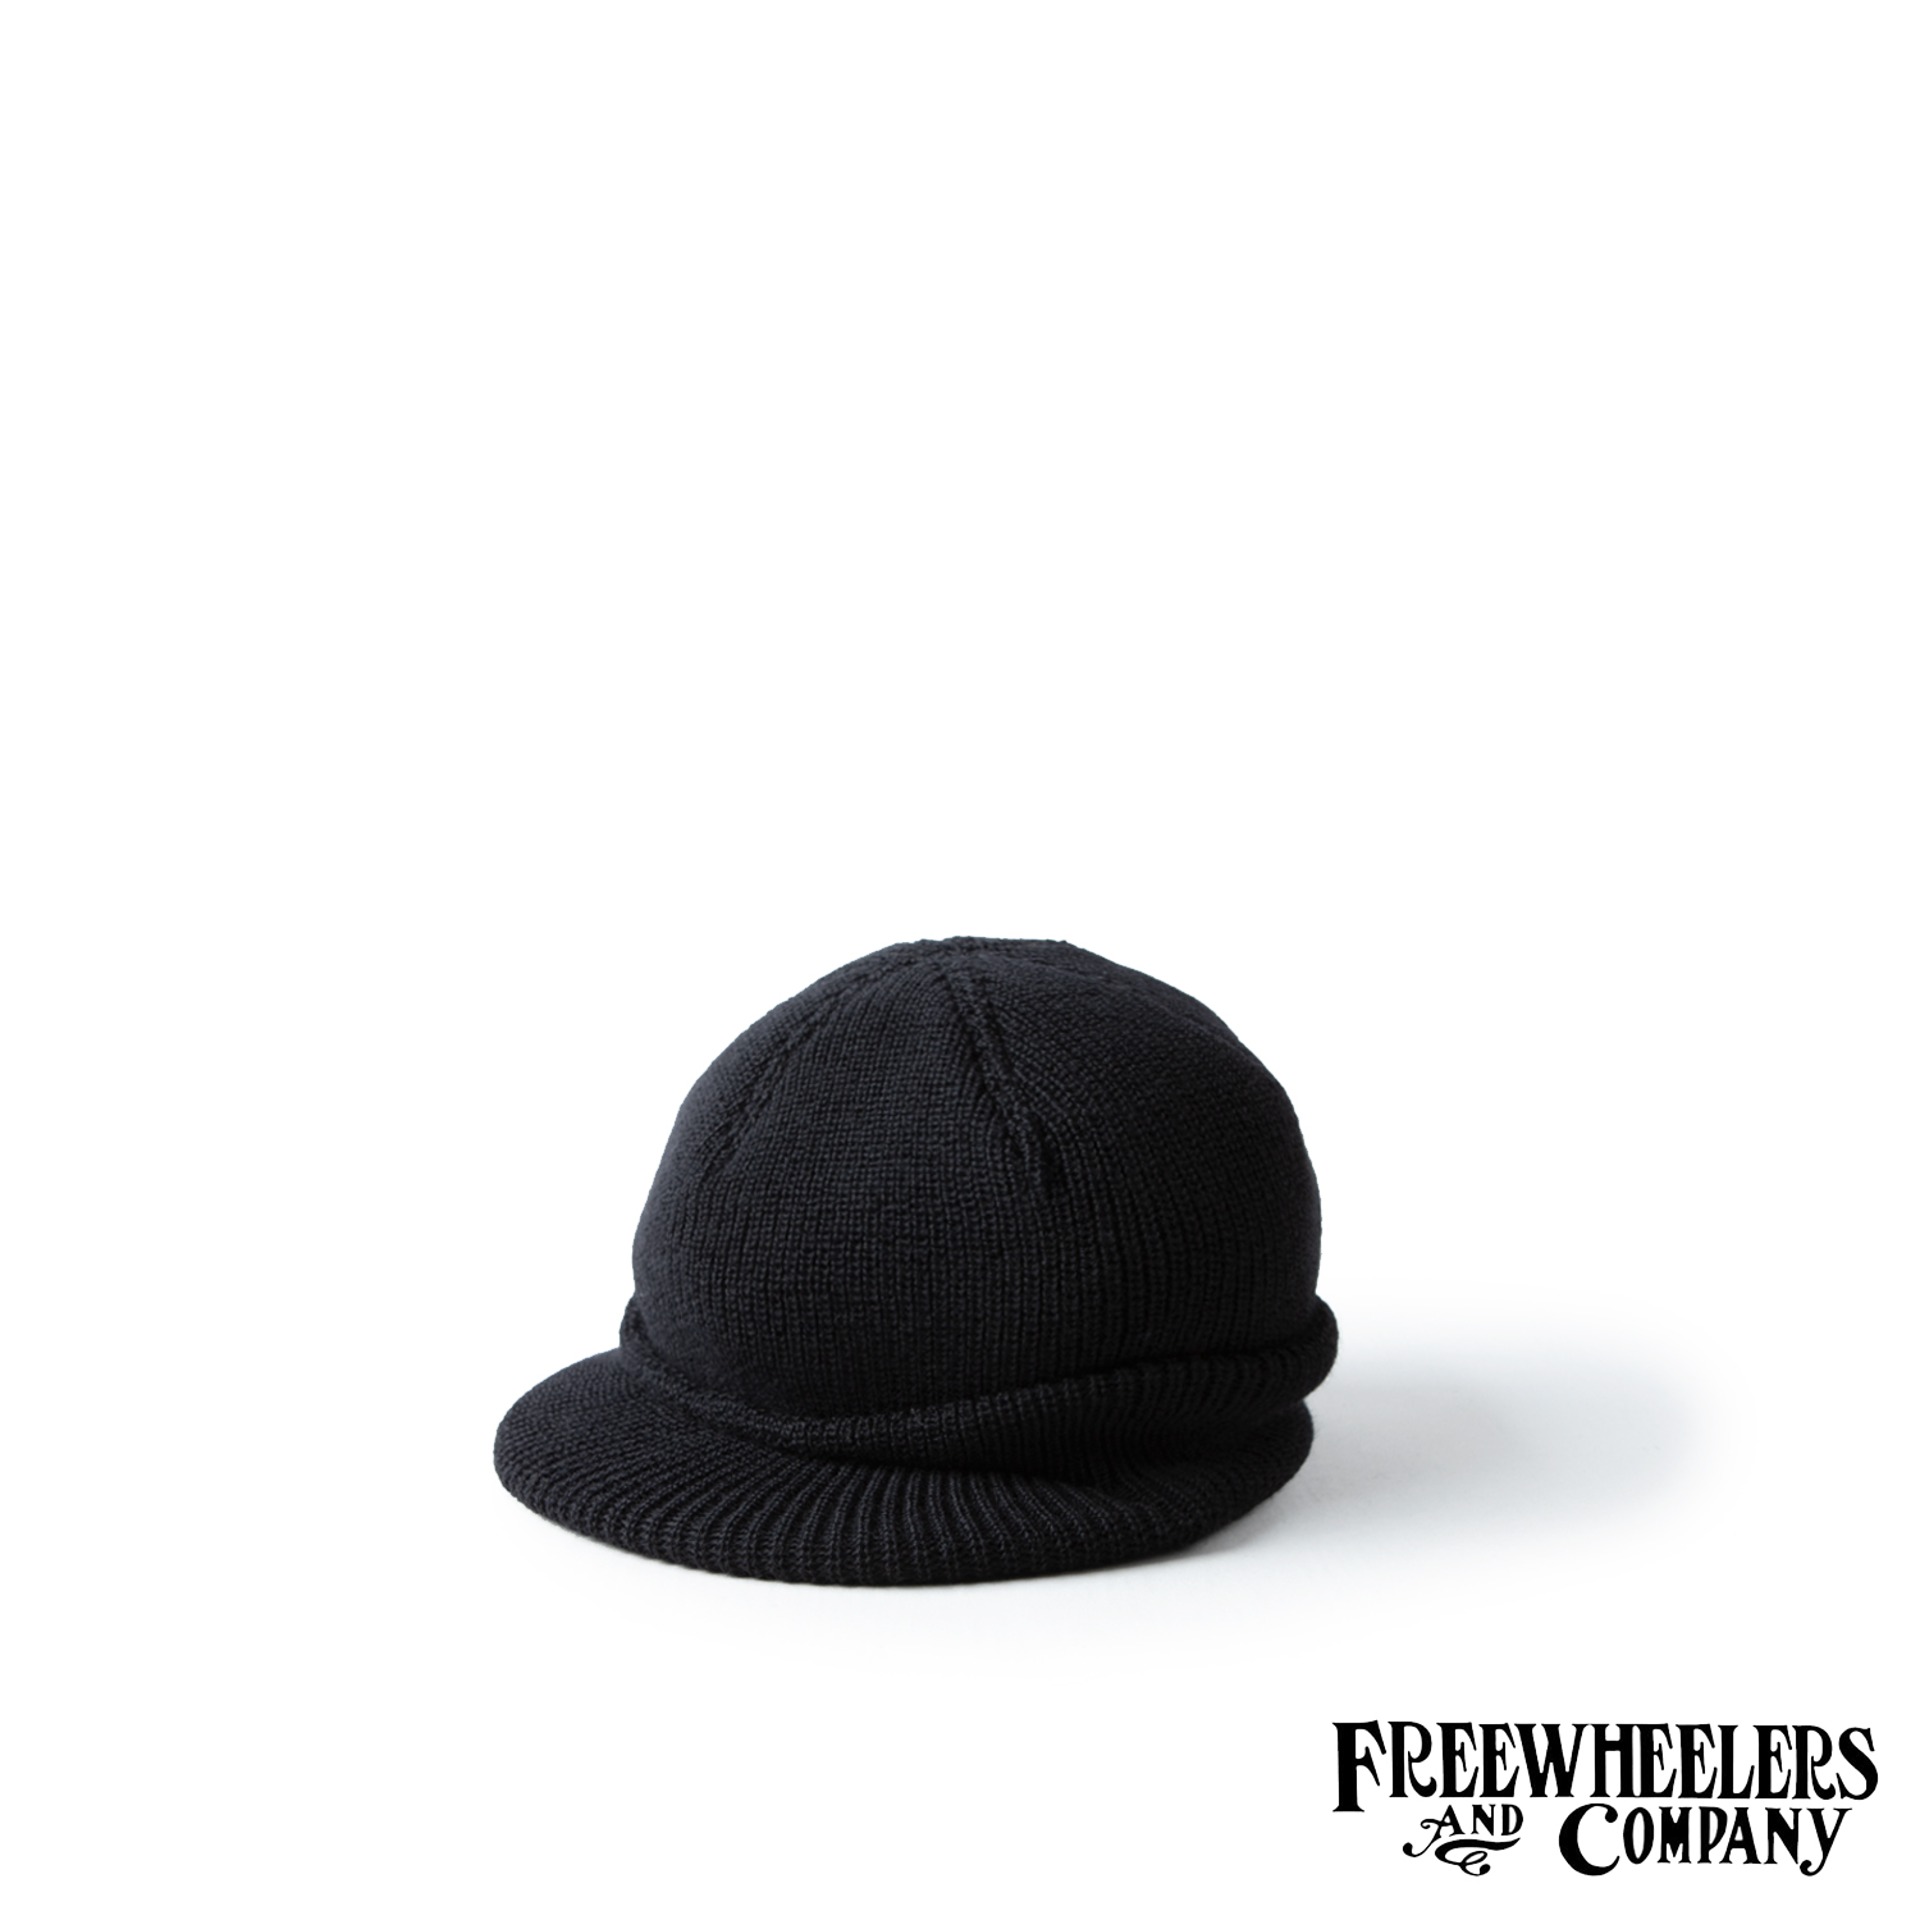 [The Union Special Overalls] 1940~1950s CIVILIAN MILITARY STYLE CLOTHING“M-1941” WOOL KNIT JEEP CAP(Black)